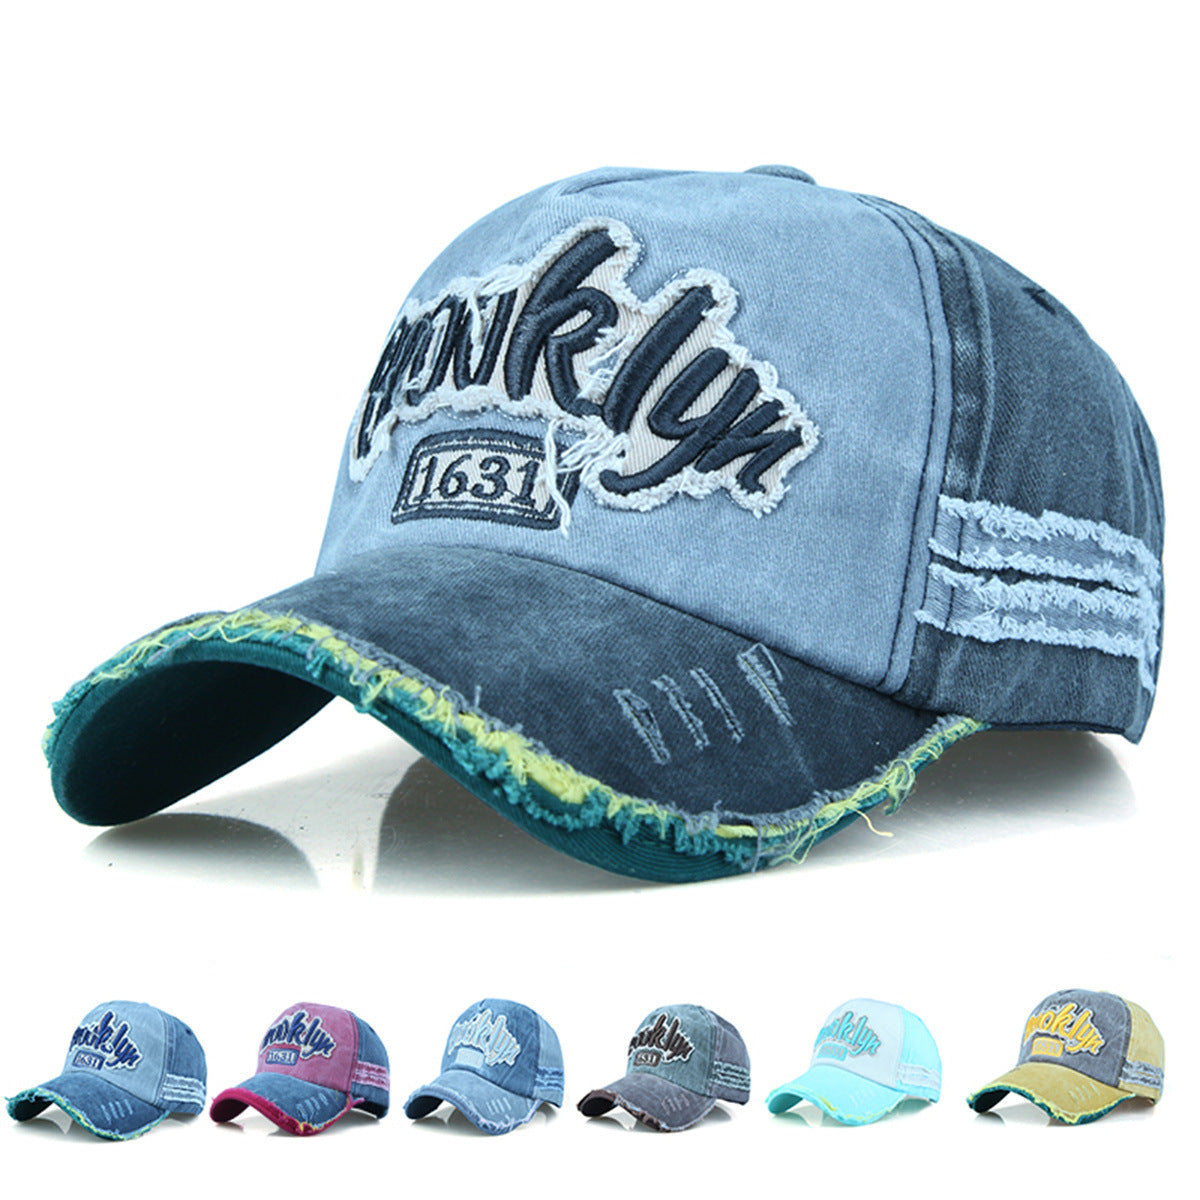 Men's Fashion Outdoor Washed Old Cotton Does Not Lose Color Duck Tongue Hat